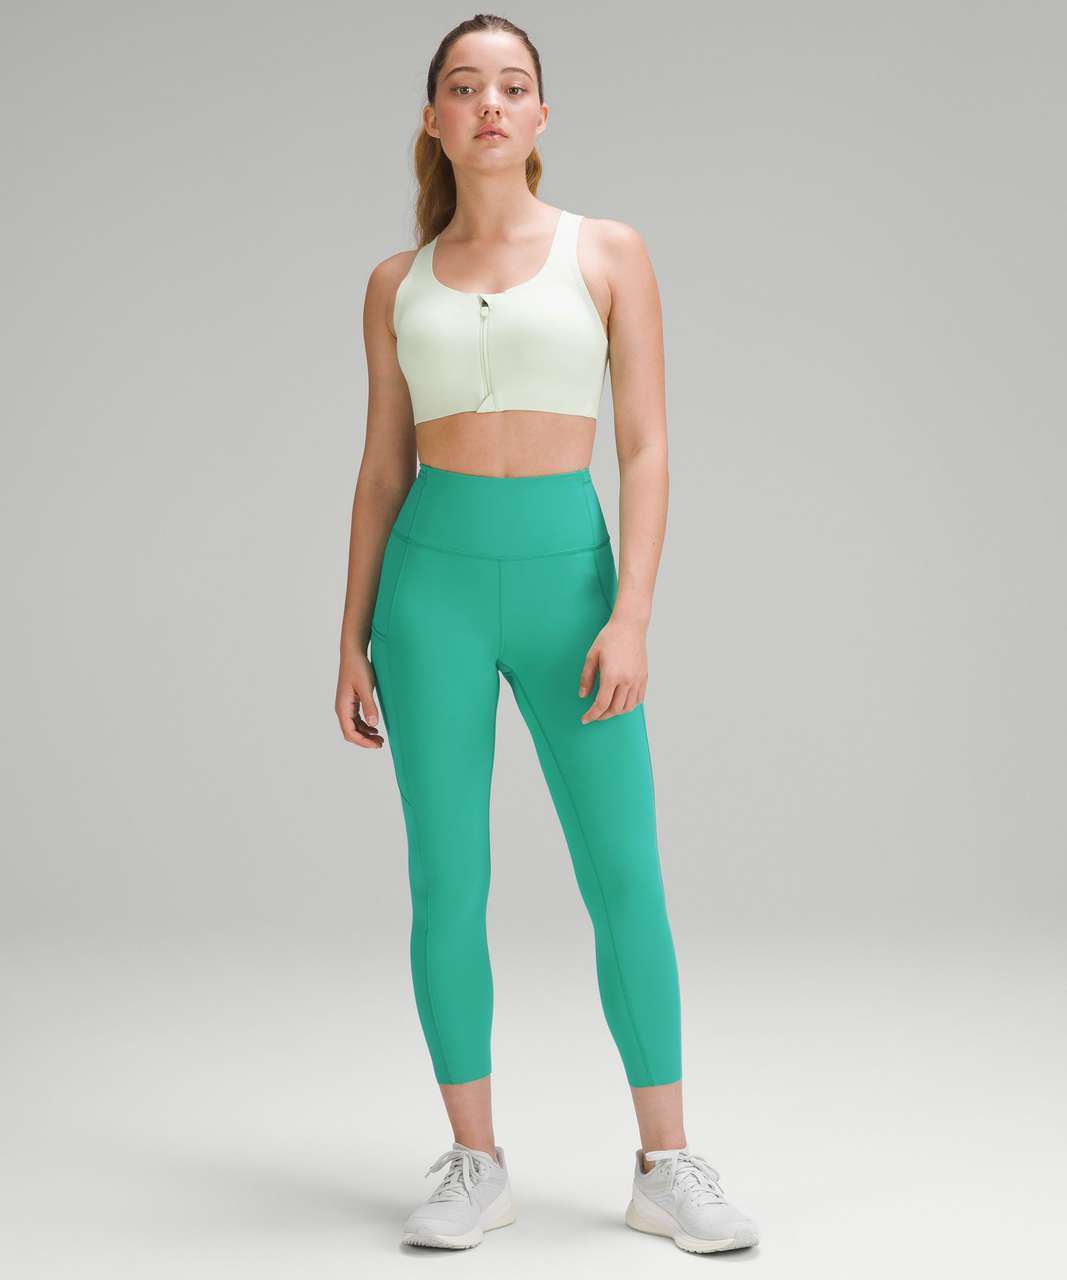 Lily Trends - 3 for 95ghs 100% Cotton leggings Free